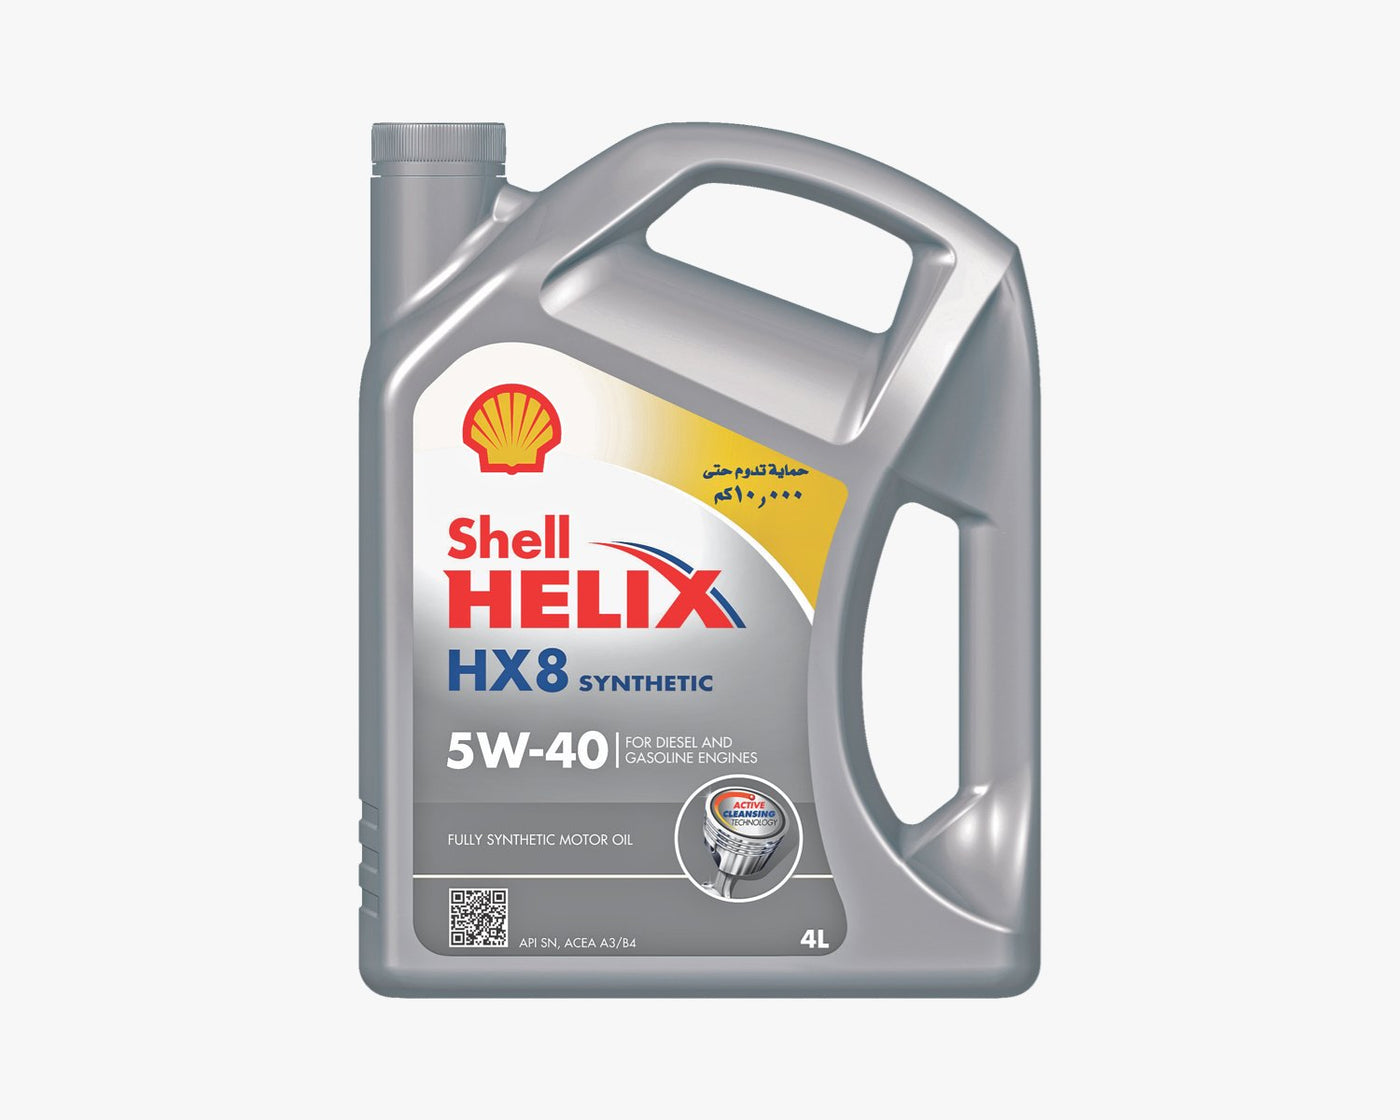 shell helix hx8 5w-40 fully synthetic